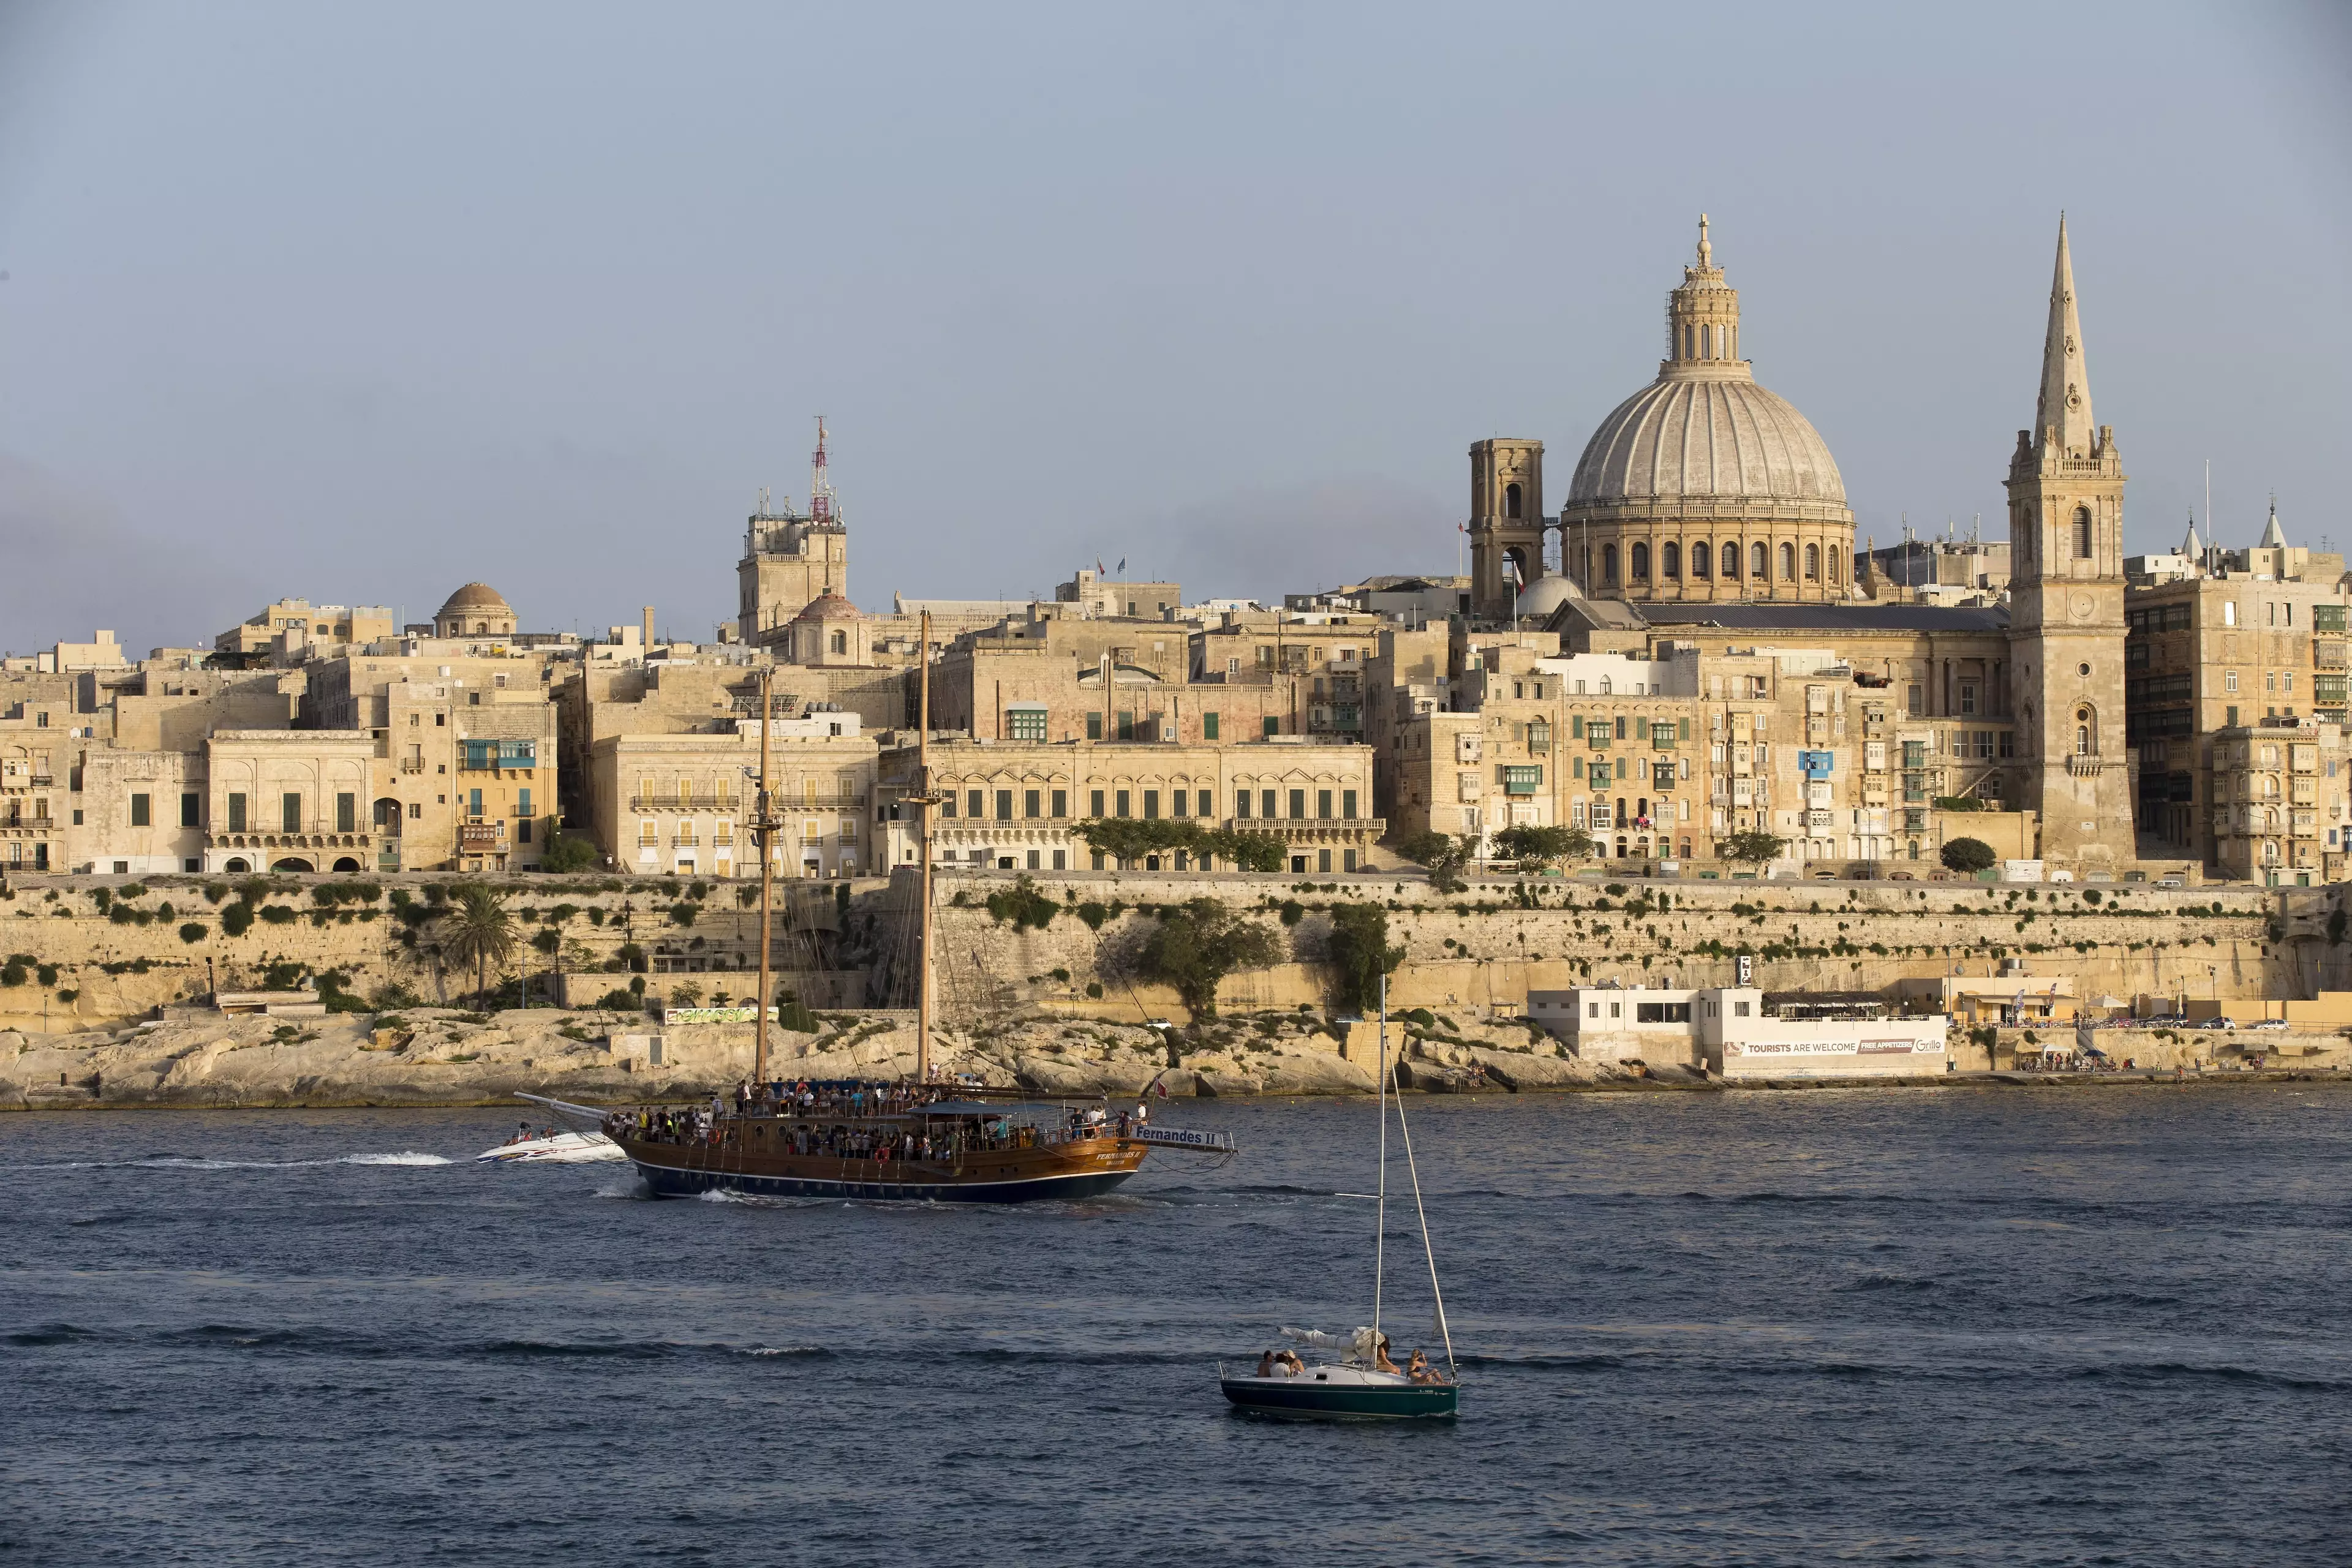 You can make great savings on flights to a number of destinations, including Malta, which looks rather lovely.